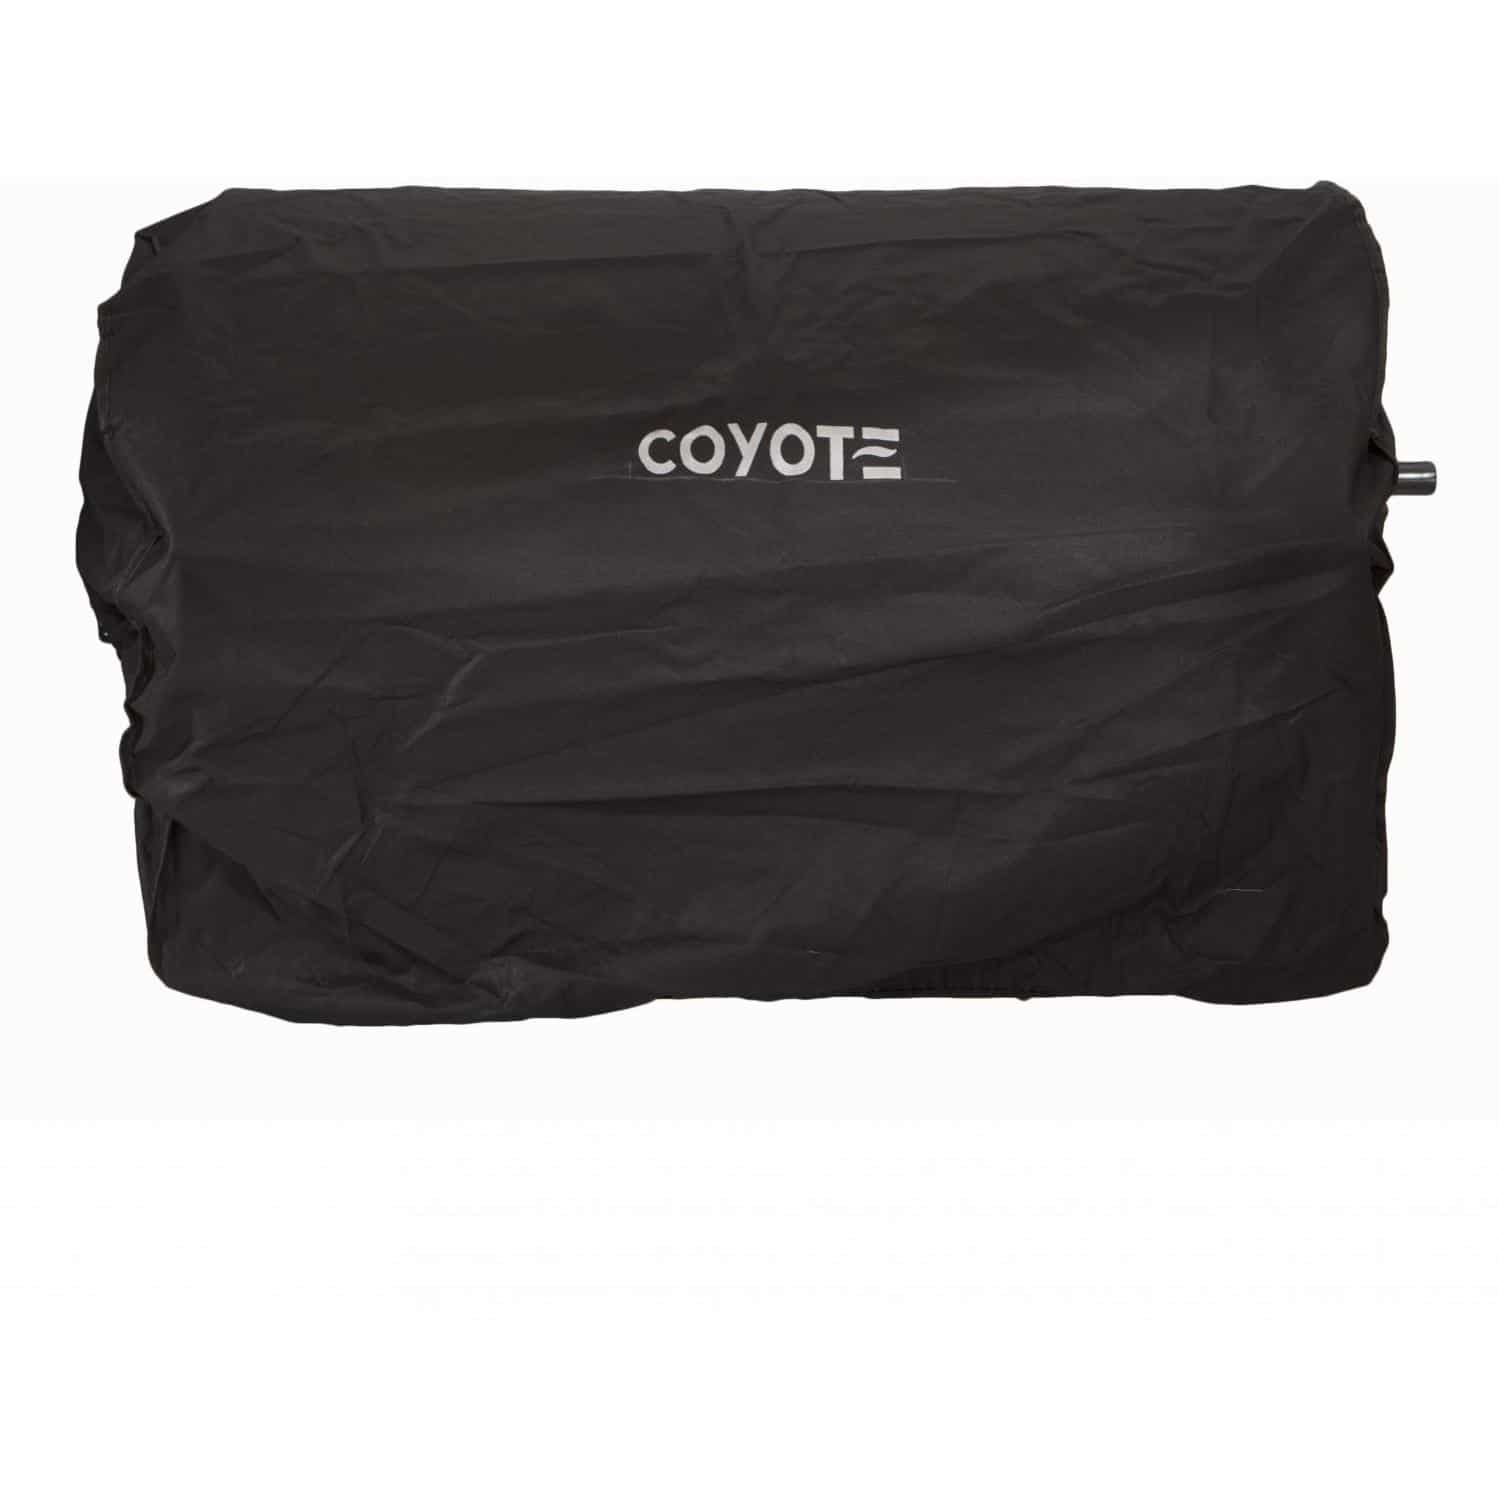 Coyote Grill Cover (Grill Head Only) for 42"W Grills Black Head Cover 